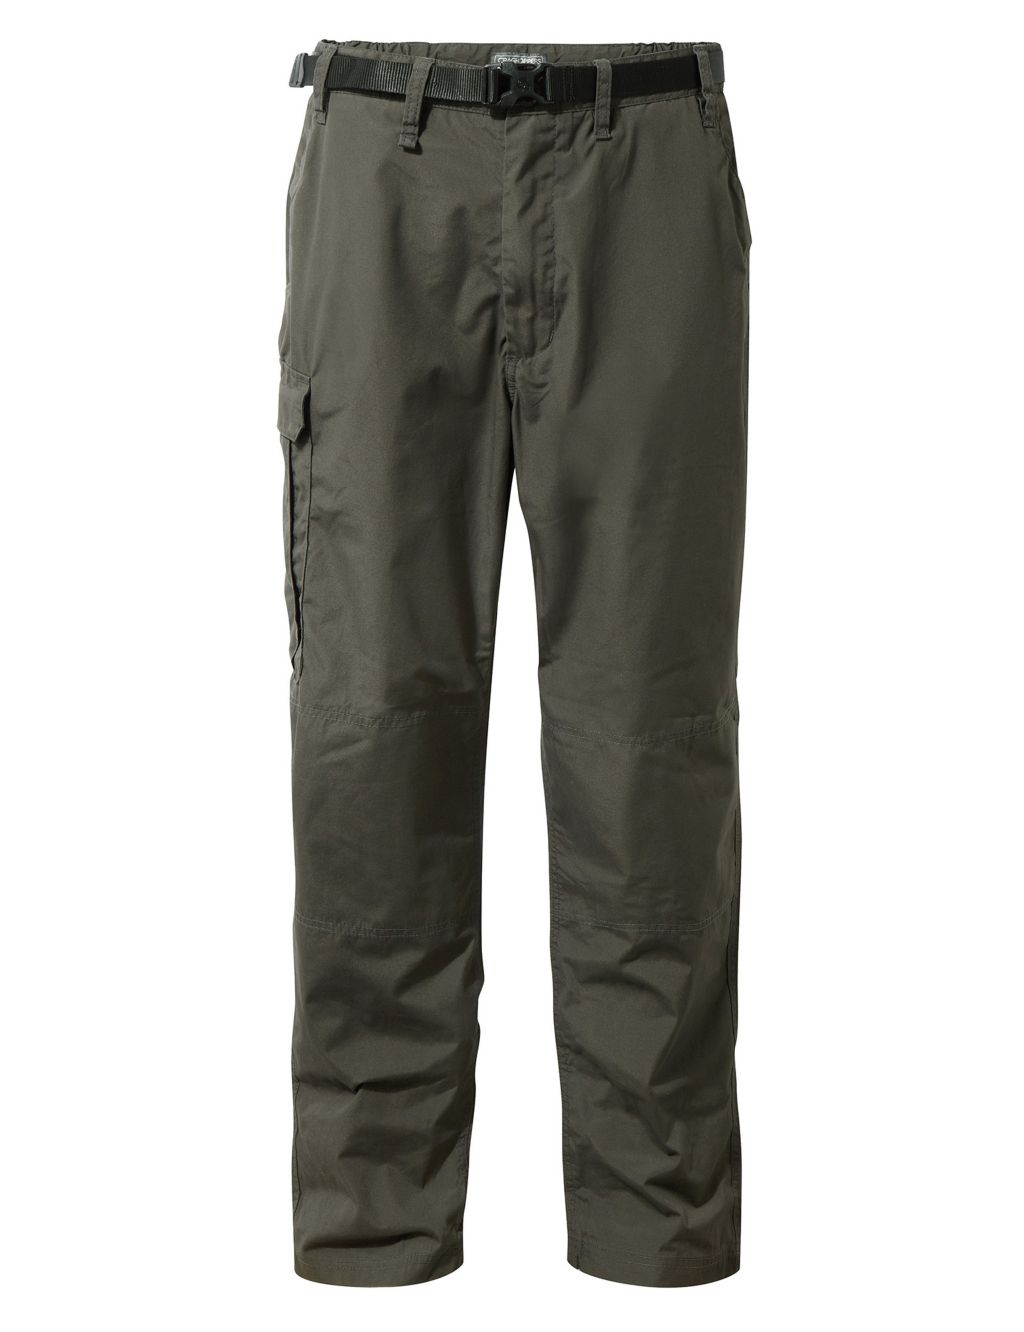 Kiwi Loose Fit Cargo Trousers image 2